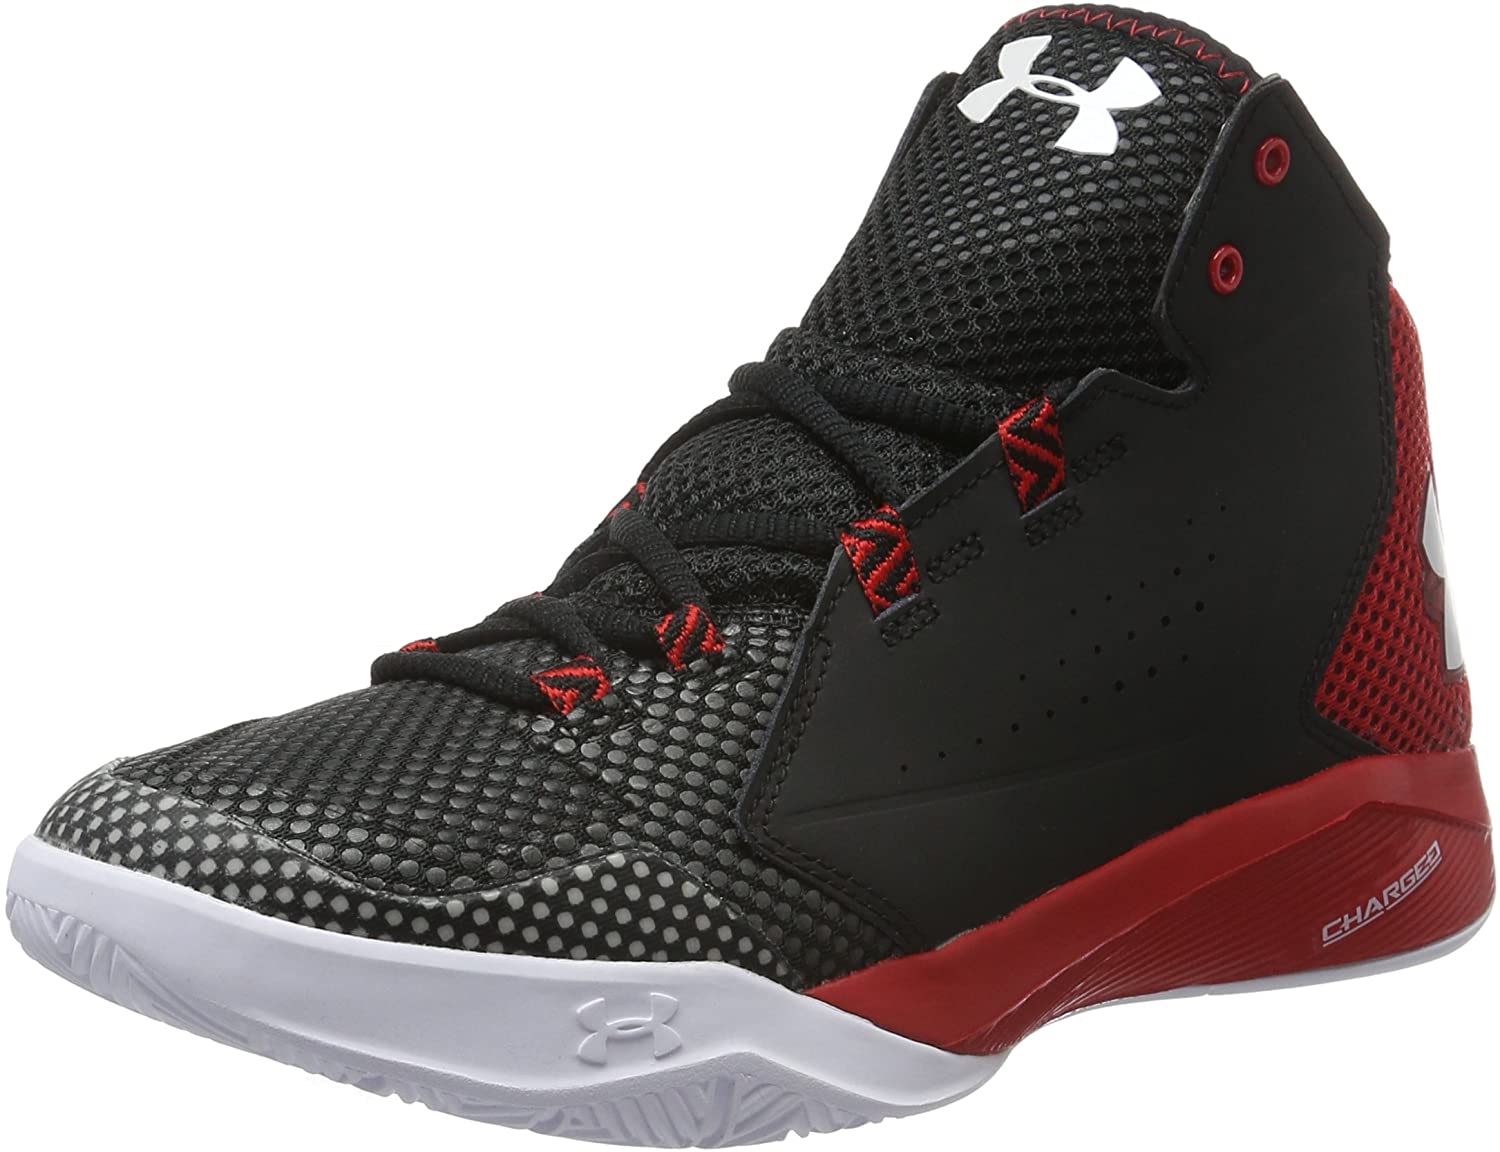 Detail Under Armour Torch Basketball Shoes Nomer 37